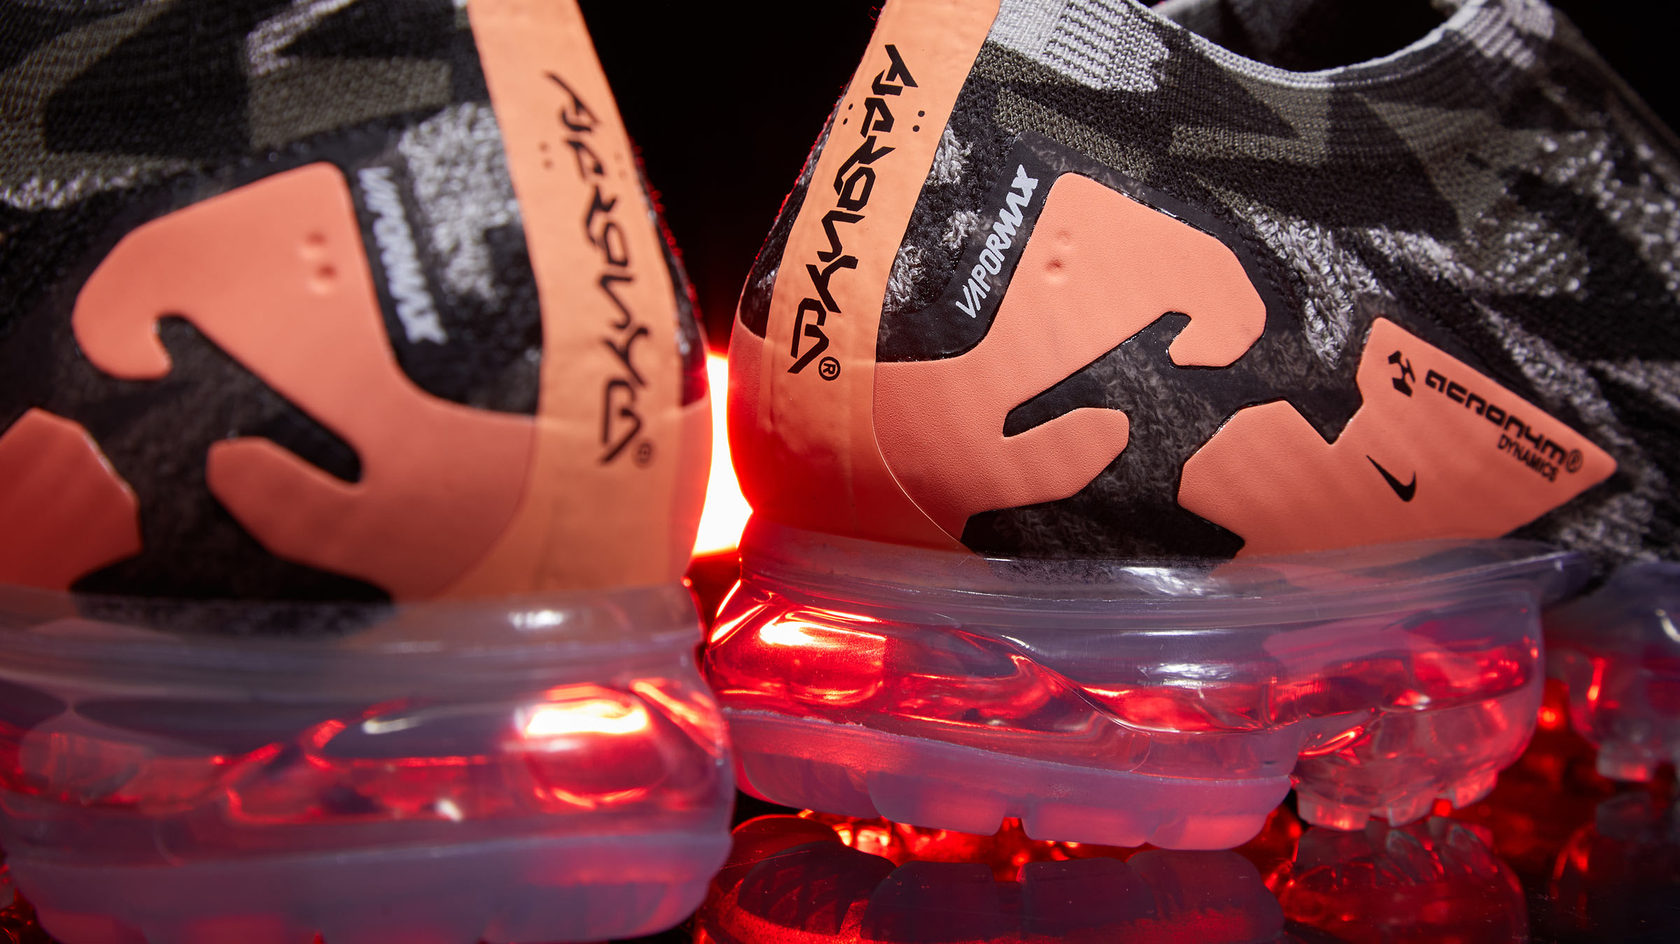 The Complete Colab History of ACRONYM x Nike - Sneaker Freaker